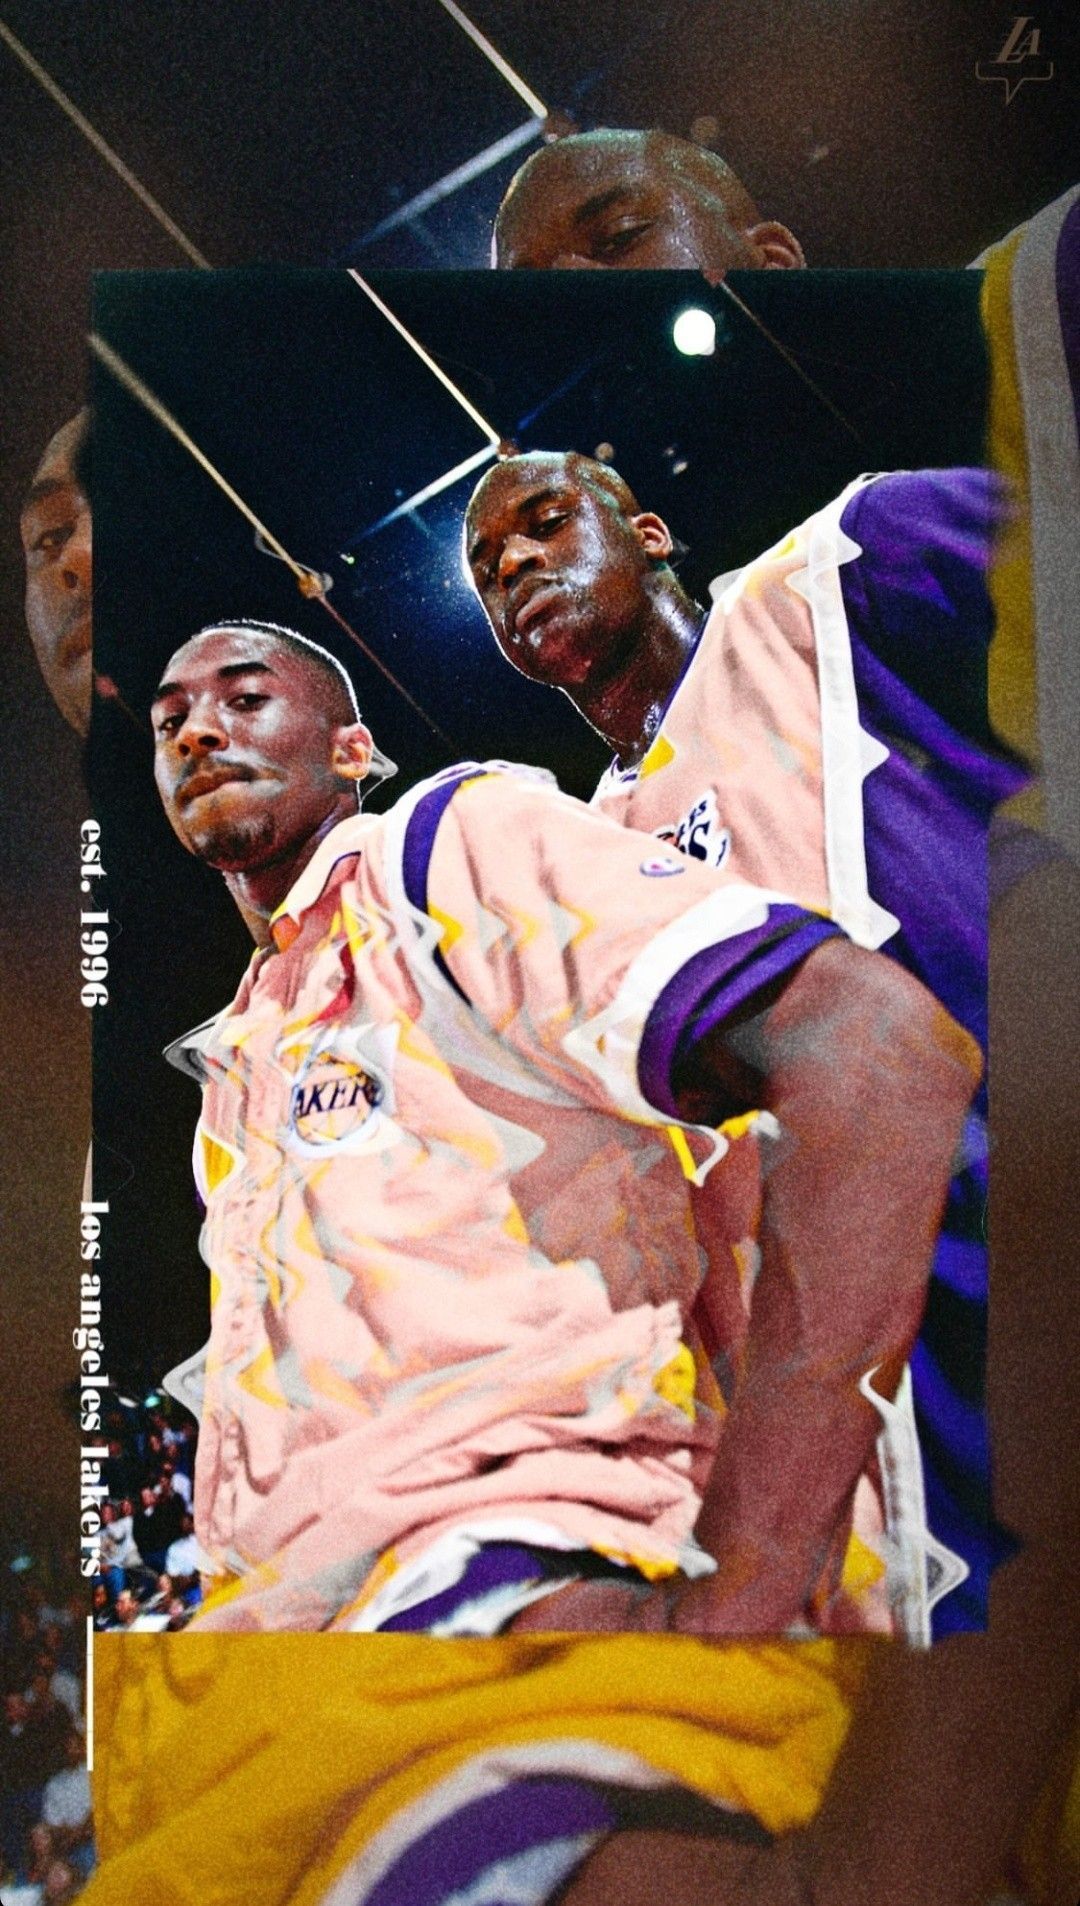 Kobe Bryant and Shaquille O'Neal wallpaper. Lakers wallpaper, Nba background, Shaquille o'neal